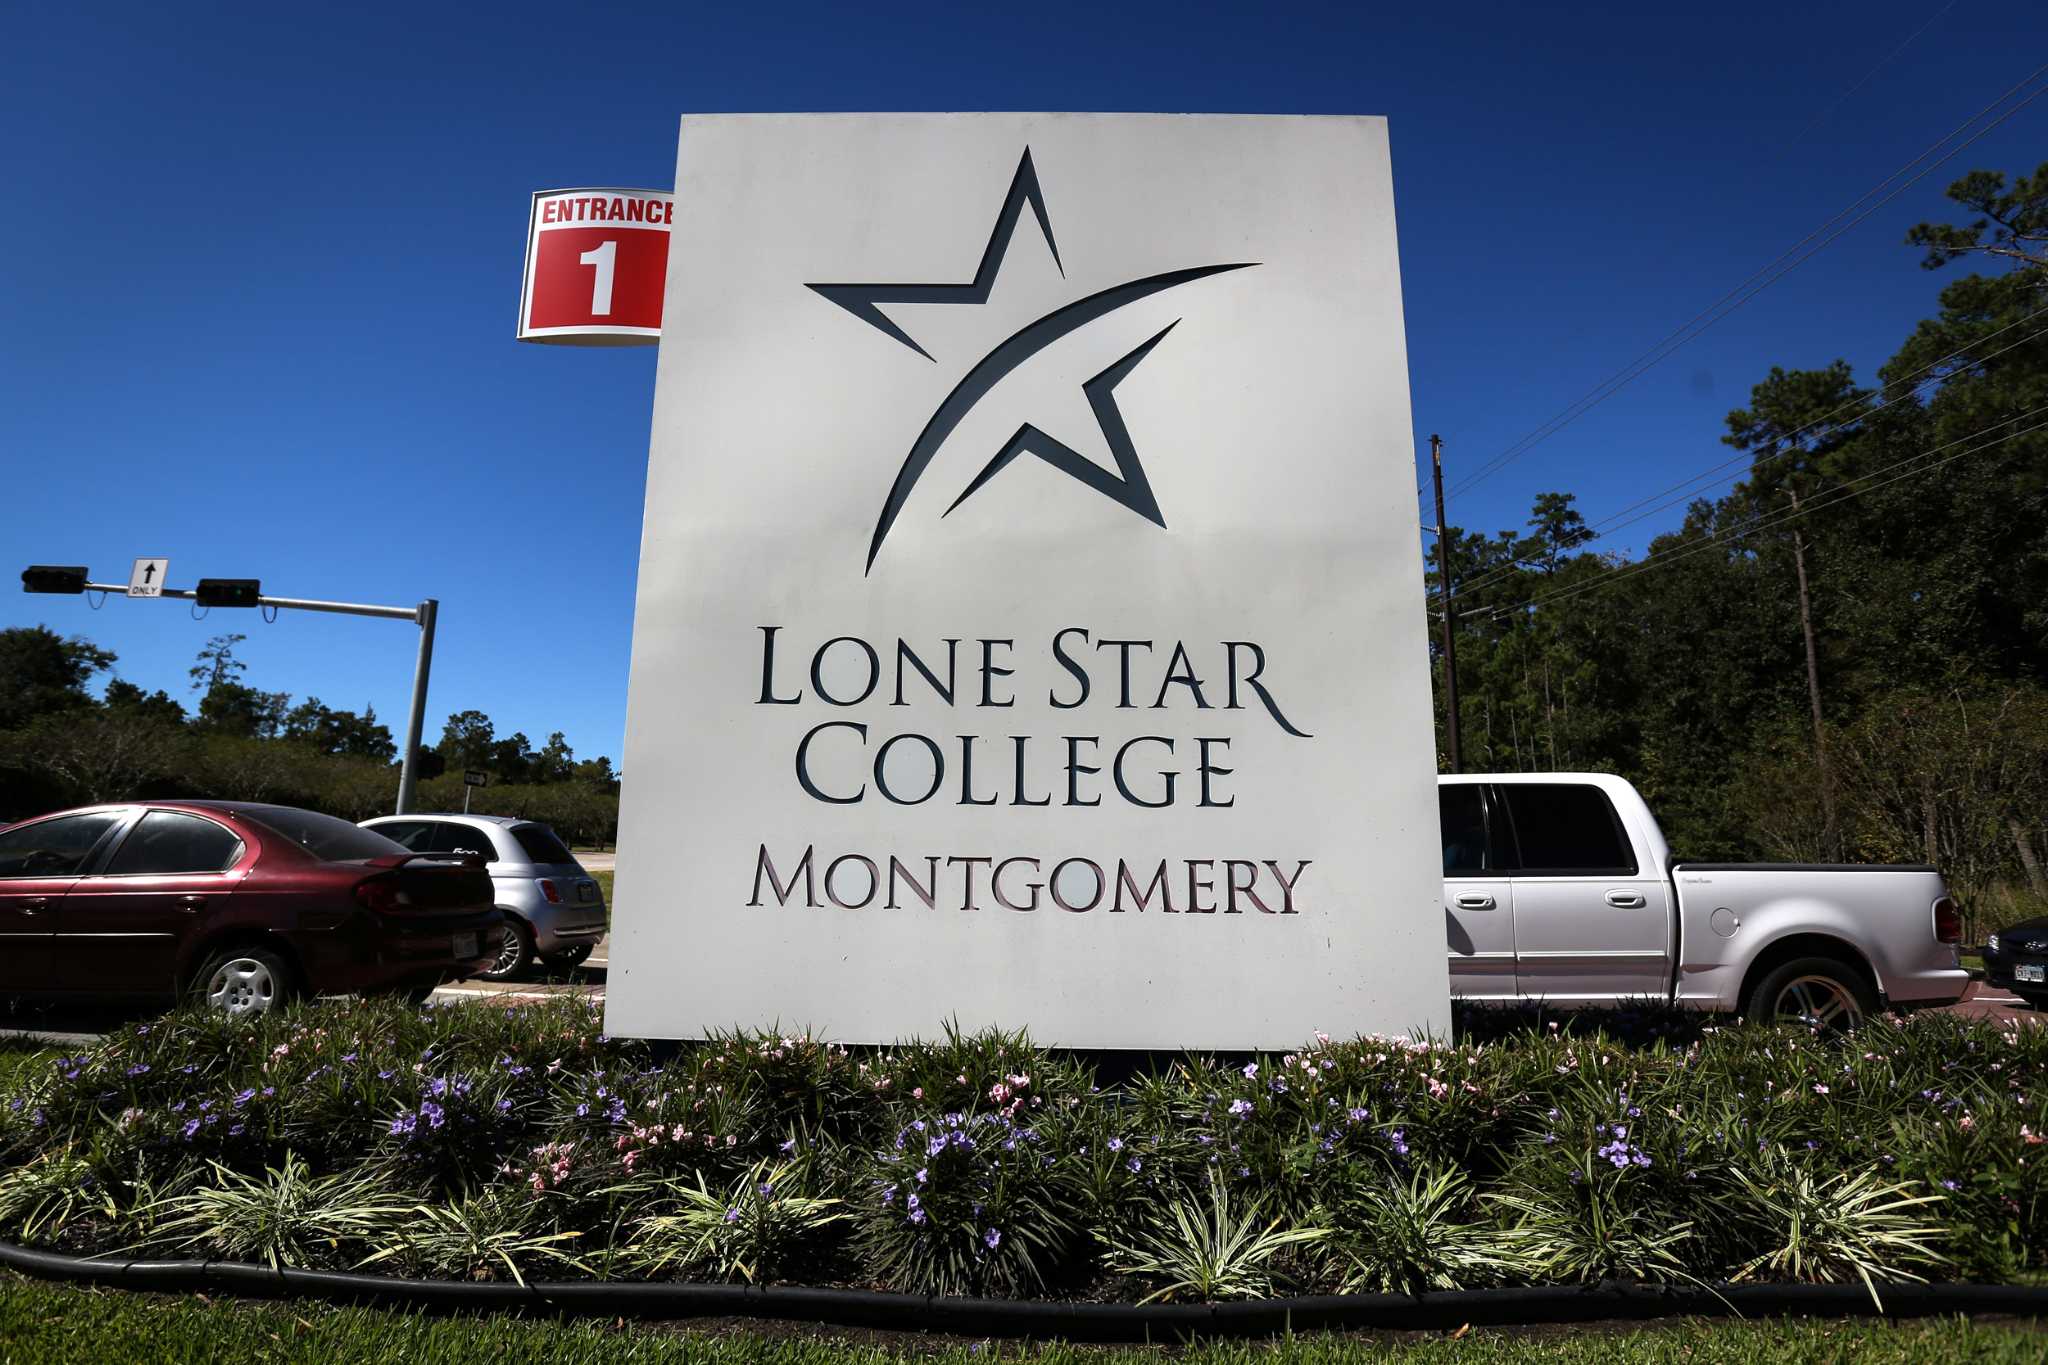 lone-star-college-student-calls-in-bomb-threat-to-skip-finals-prosecutors-say-the-courier